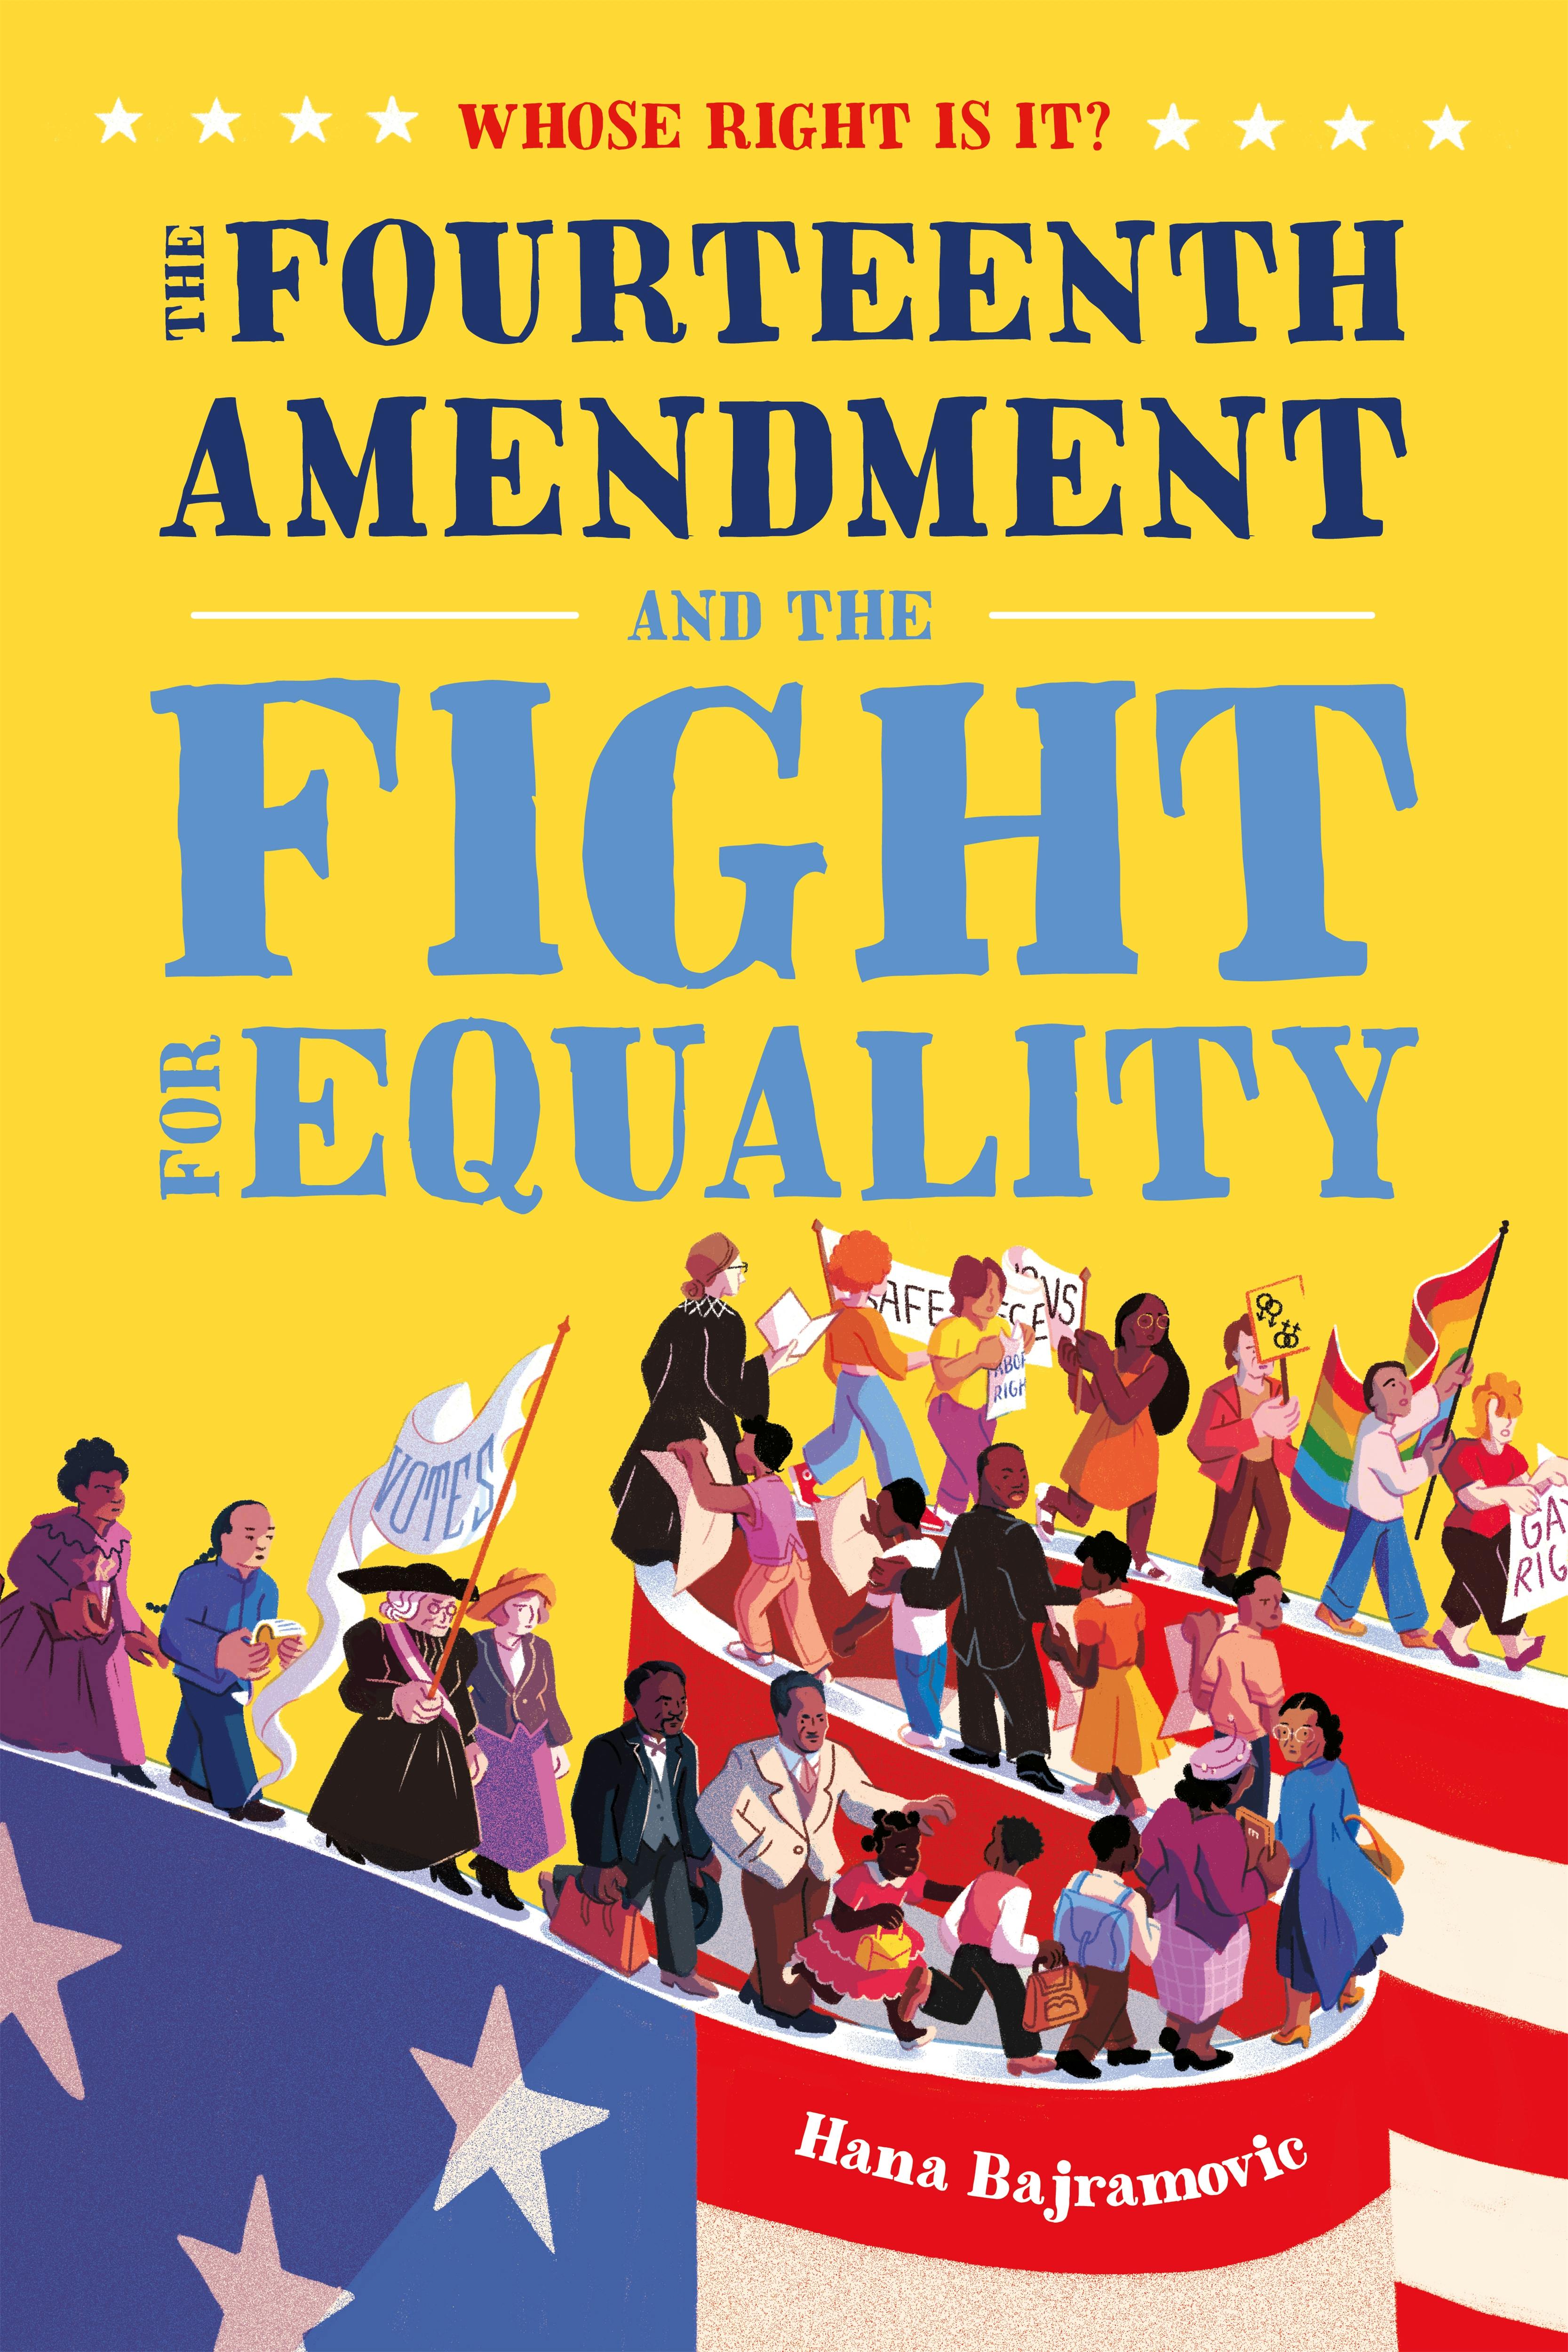 Whose Right Is It? The Fourteenth Amendment and the Fight for Equality